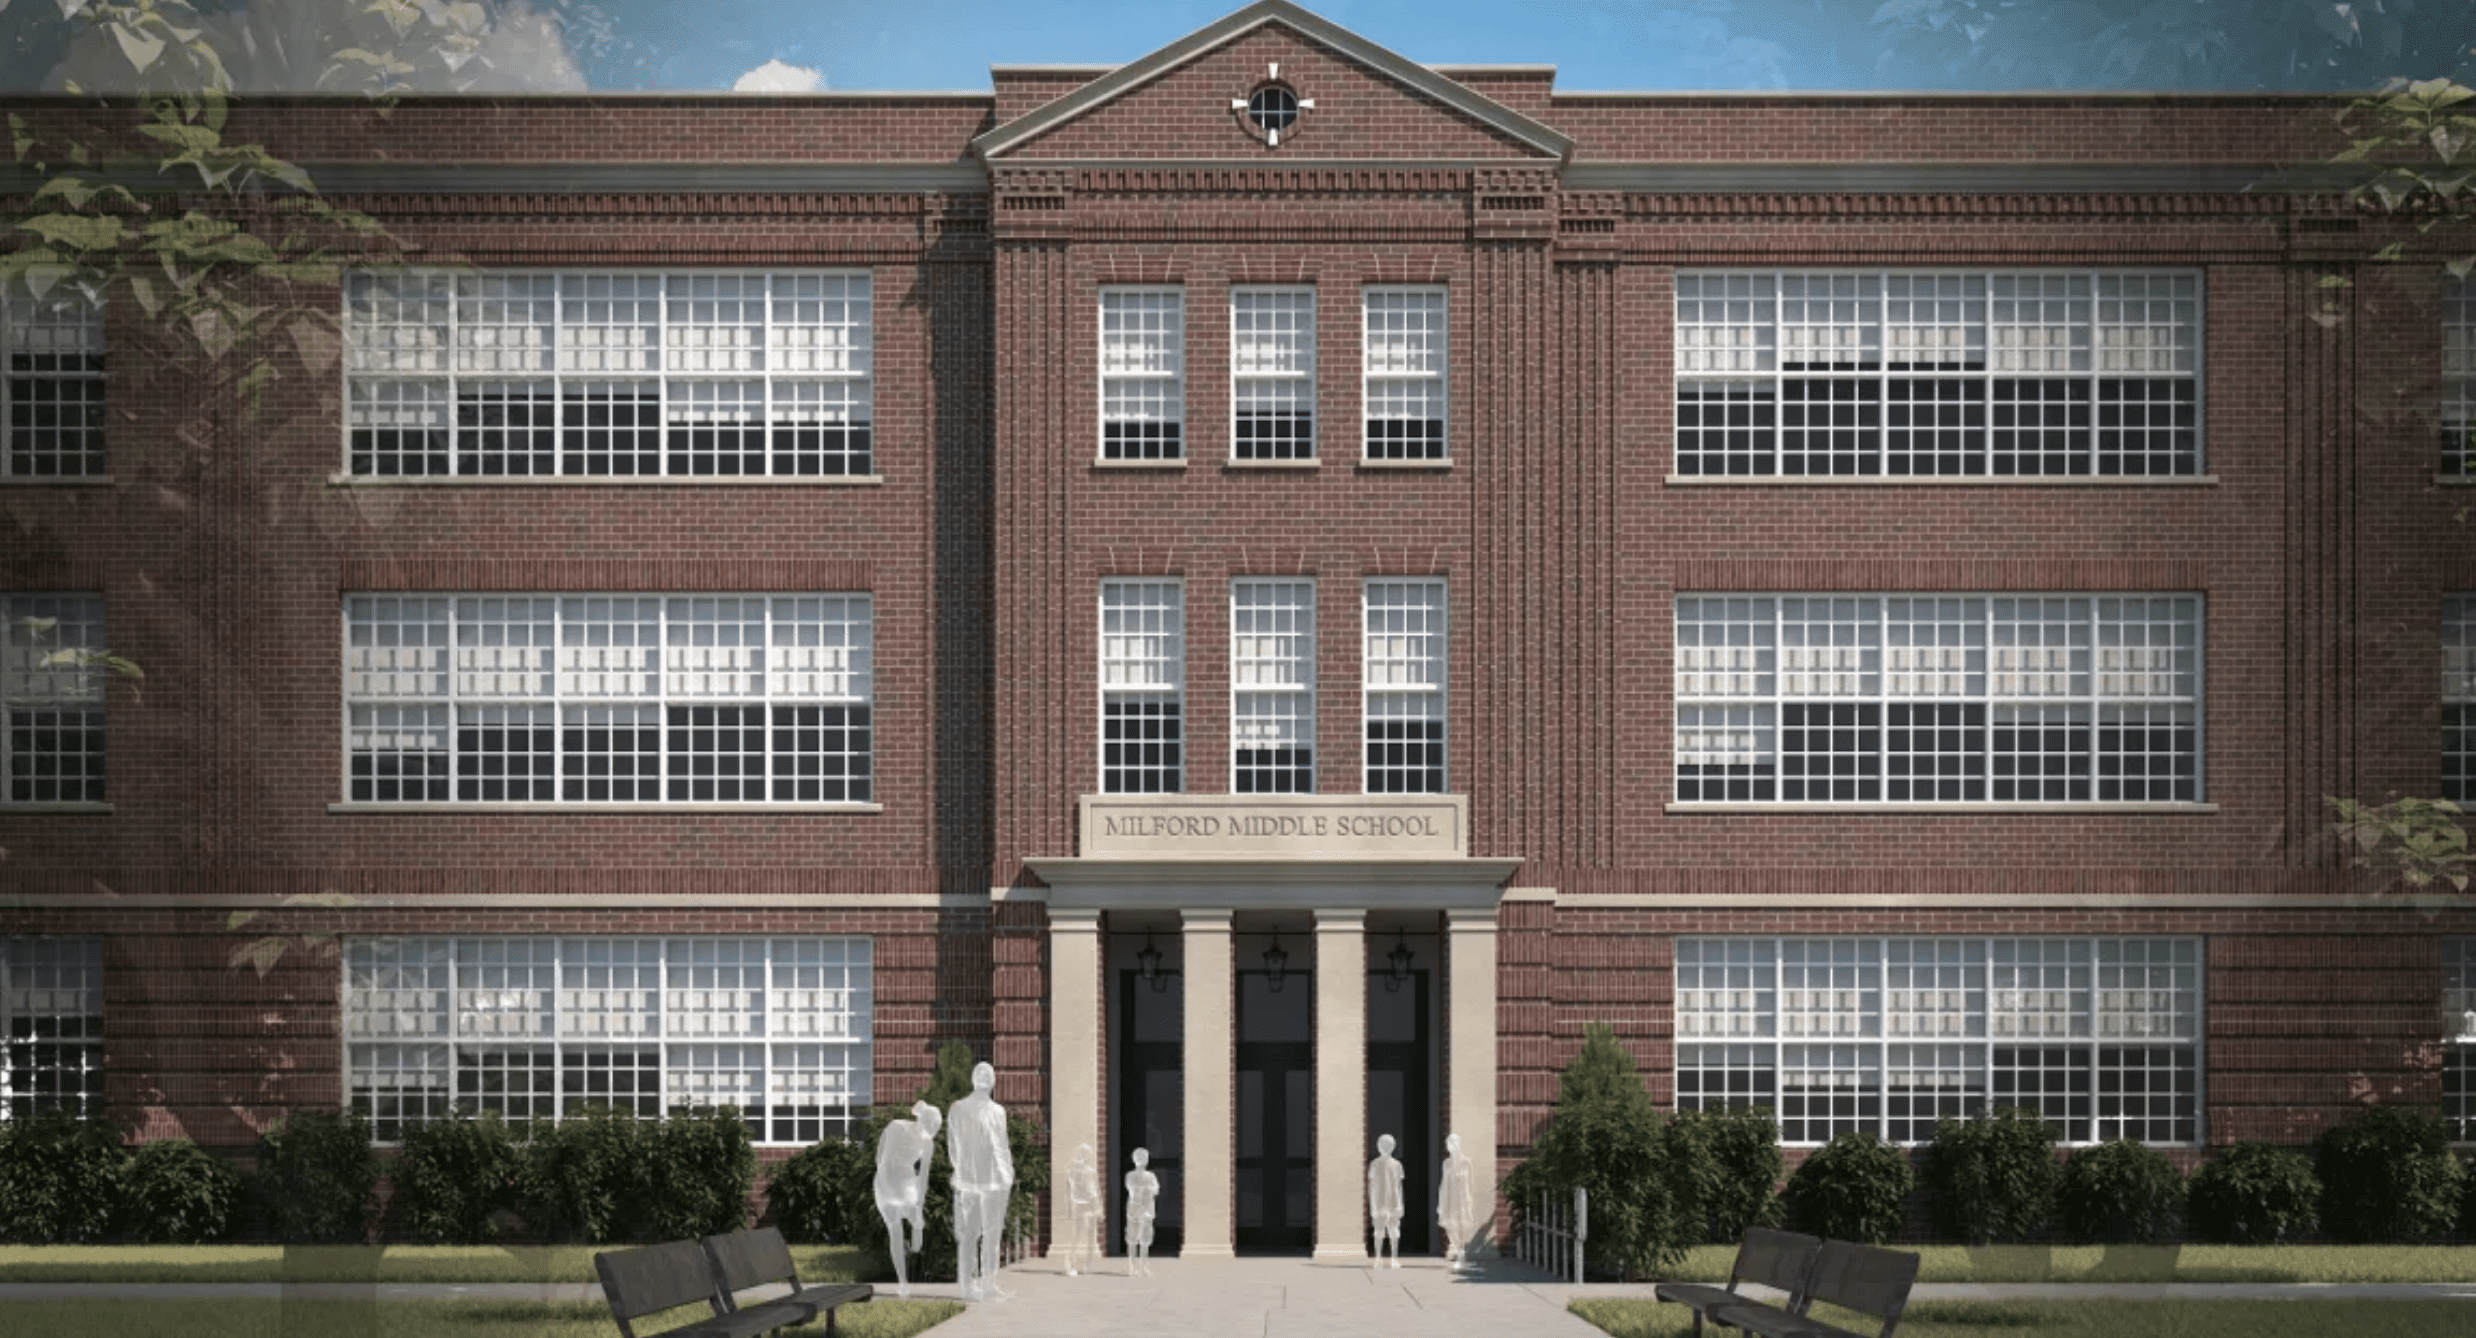 Featured image for “New Milford school gets its name: Milford Middle School”